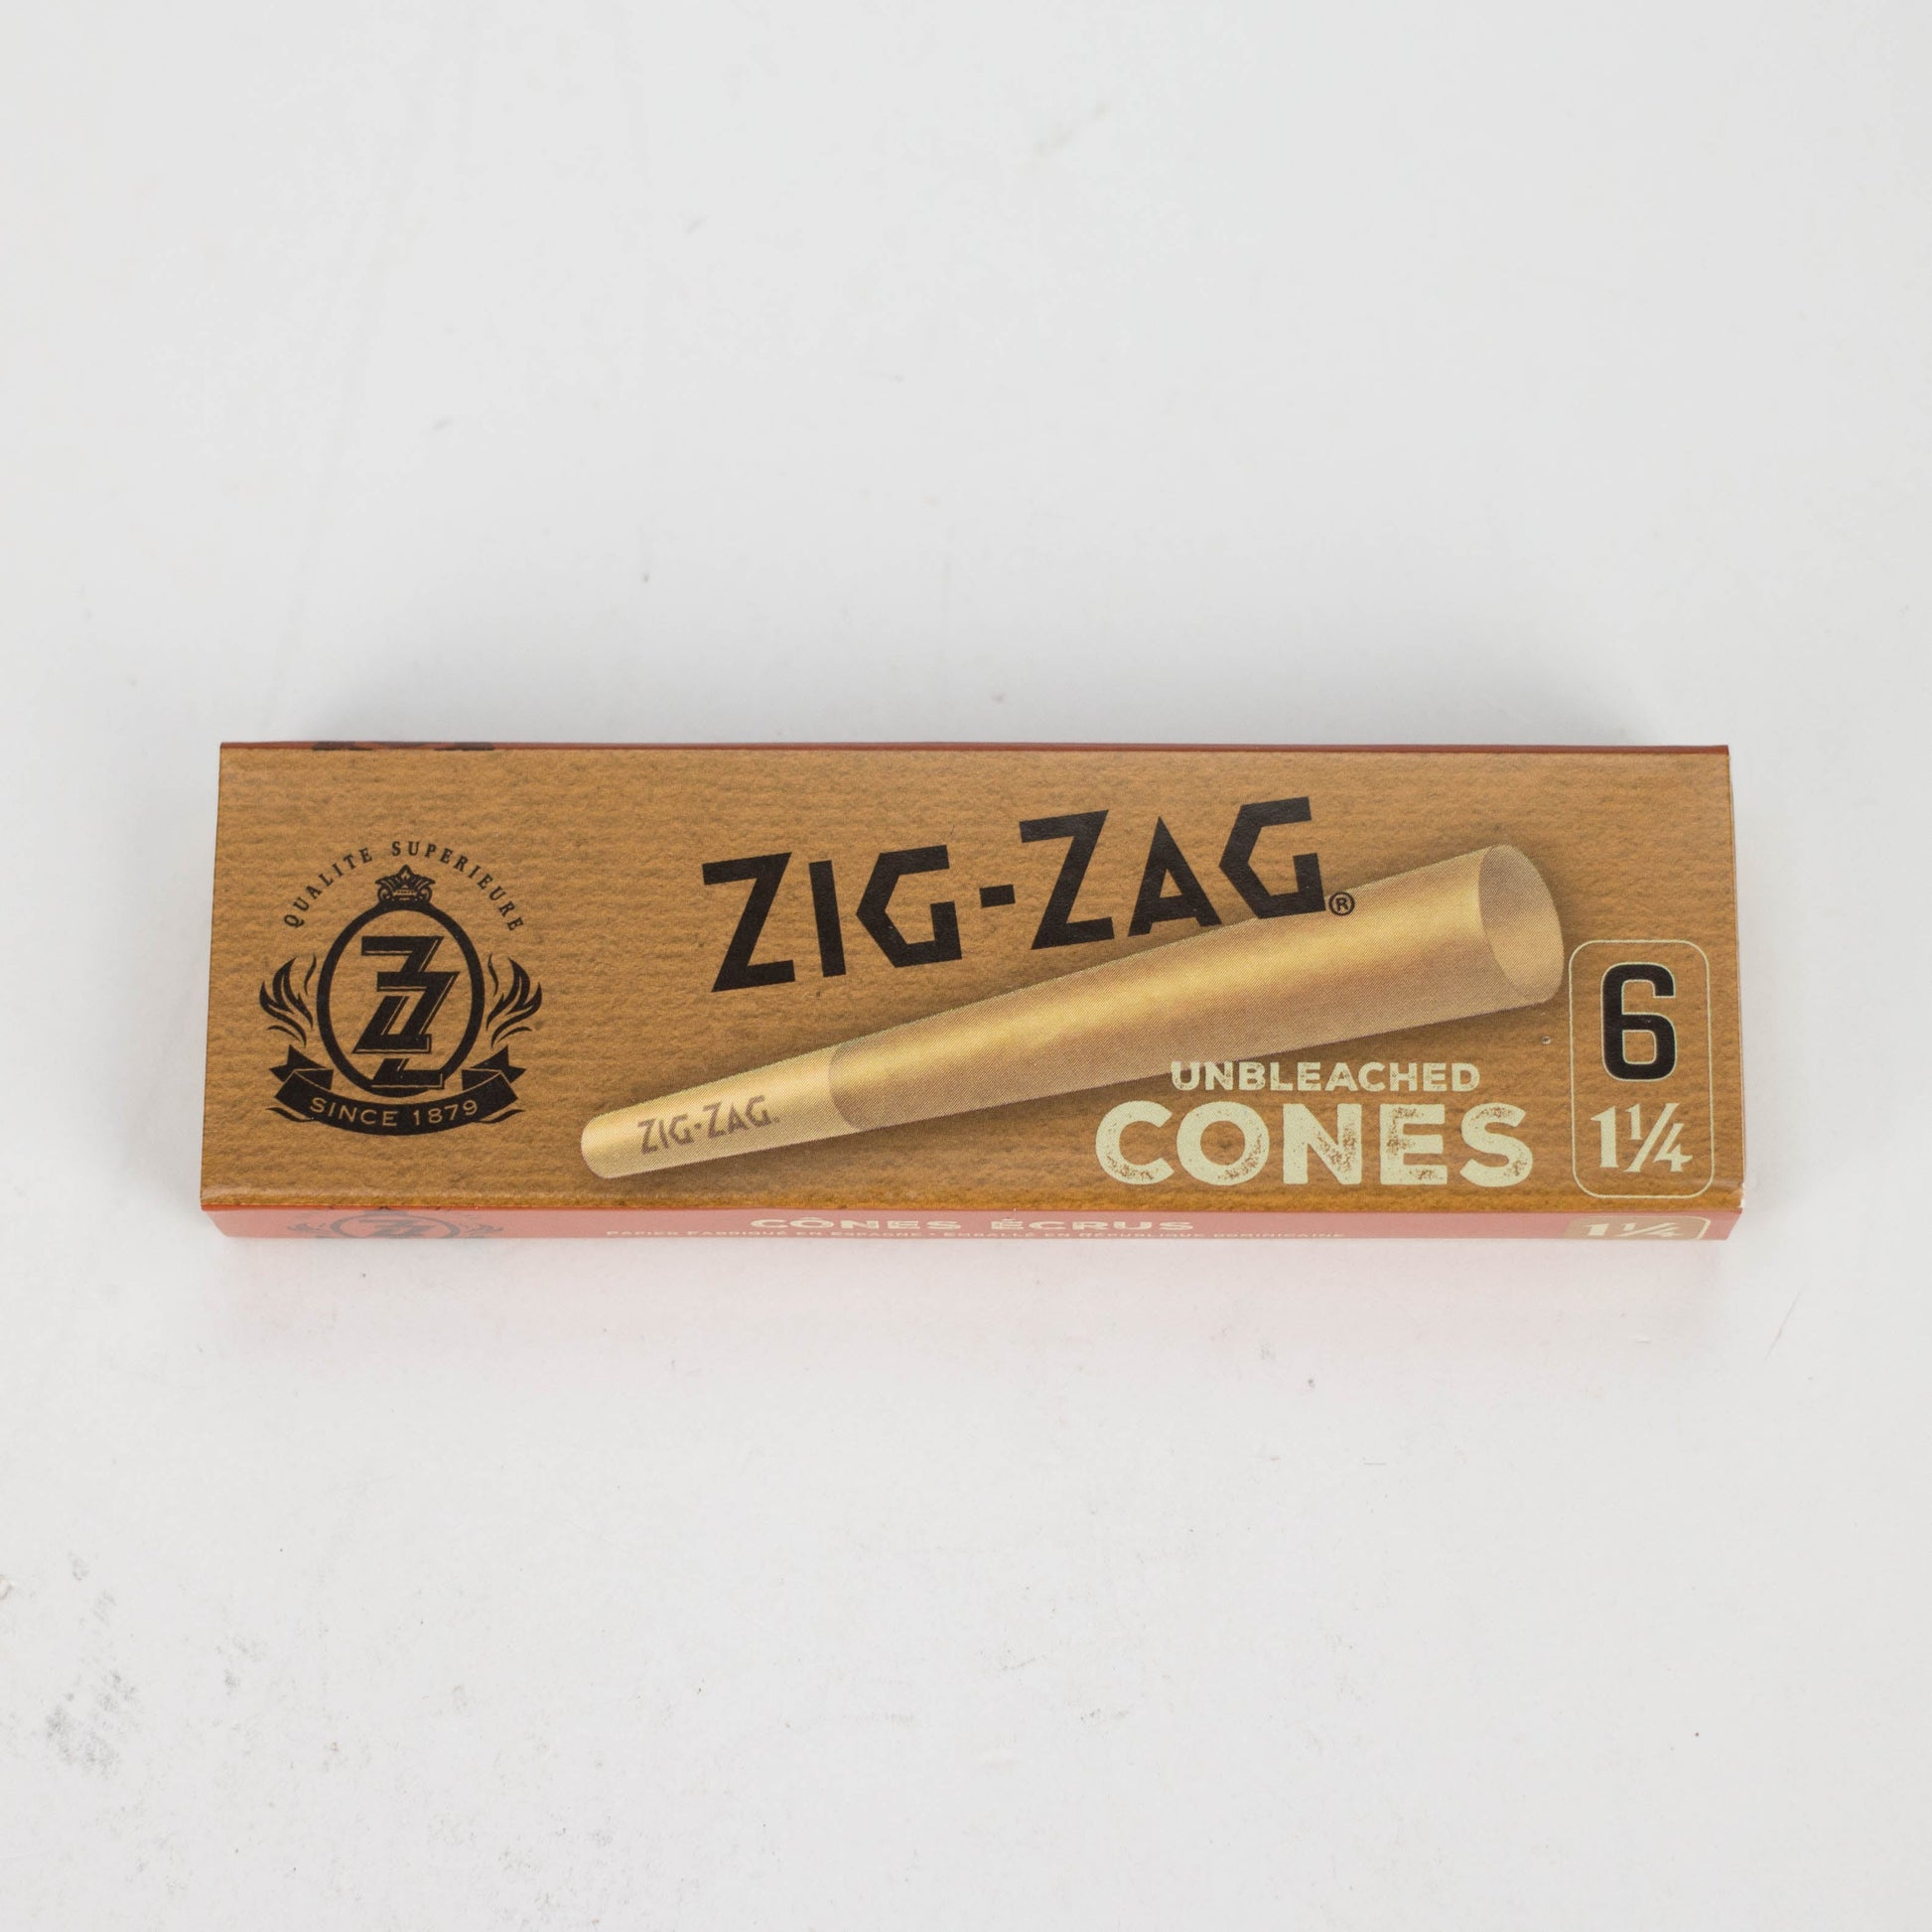 Pre-Rolled Cones - Zig-Zag Brown 1 1/4 Papers Box of 24_1